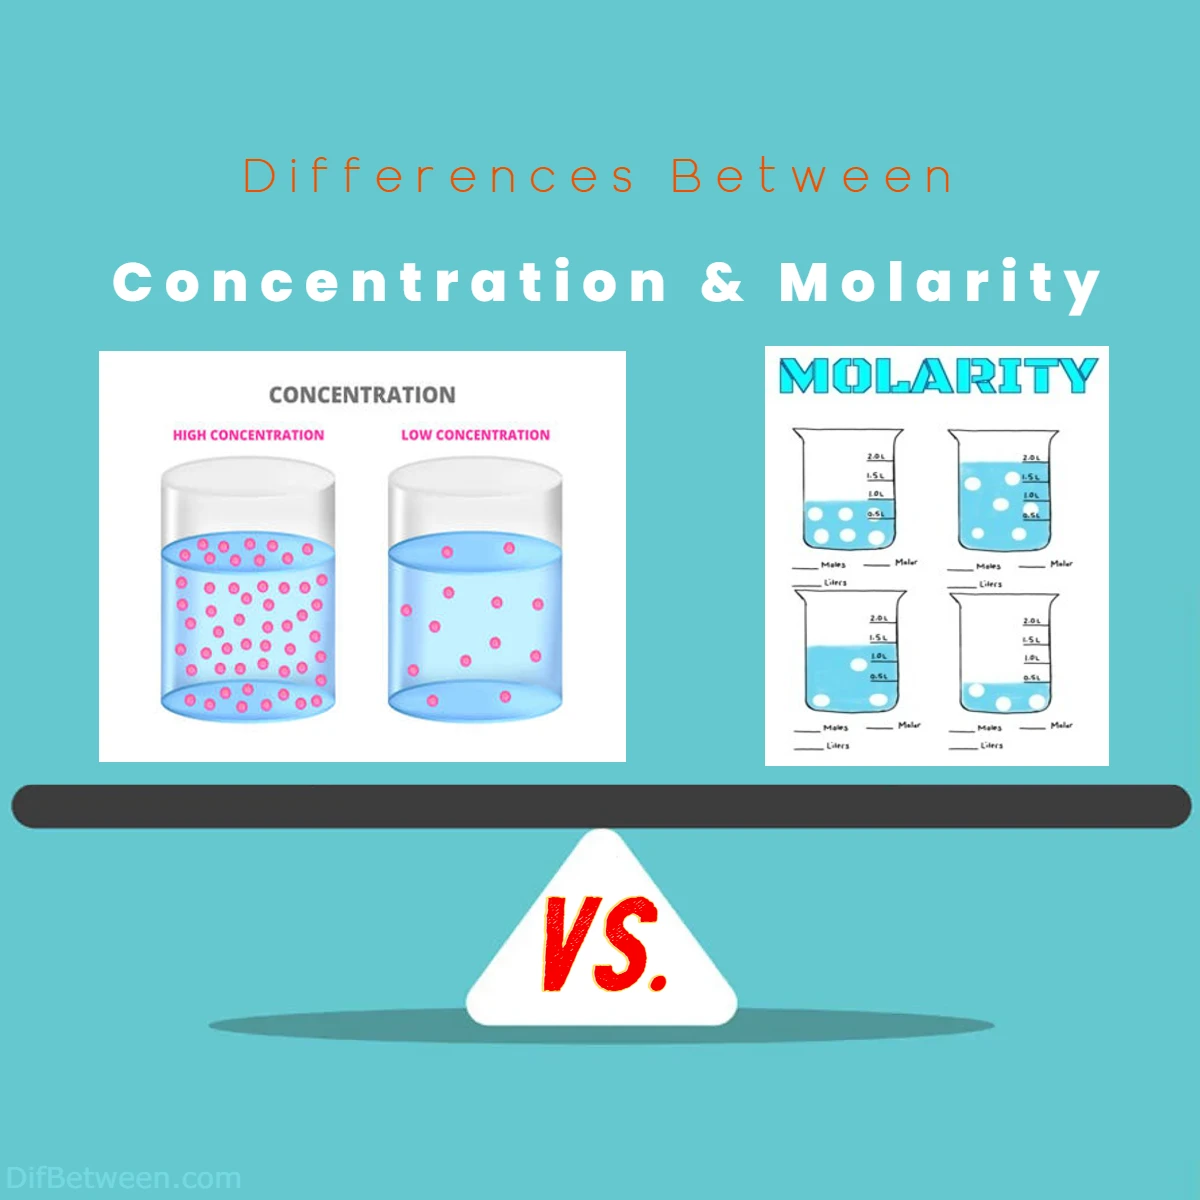 Differences Between Concentration vs Molarity